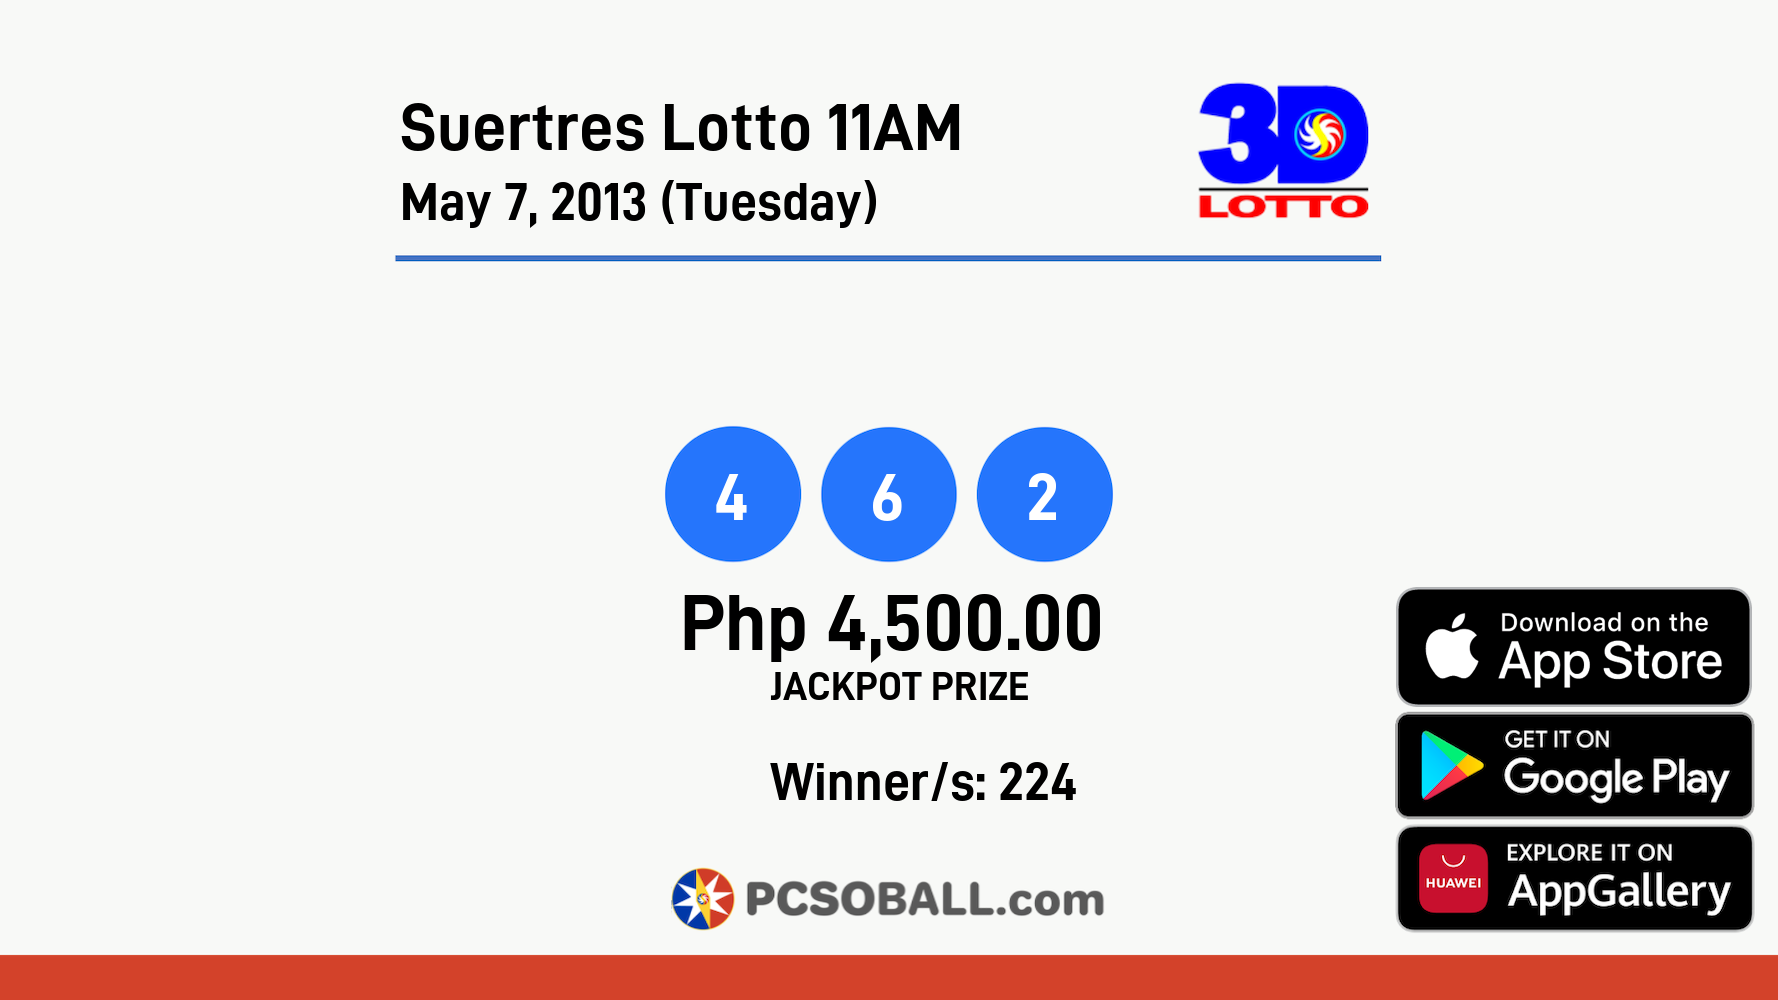 Suertres Lotto 11AM May 7, 2013 (Tuesday) Result